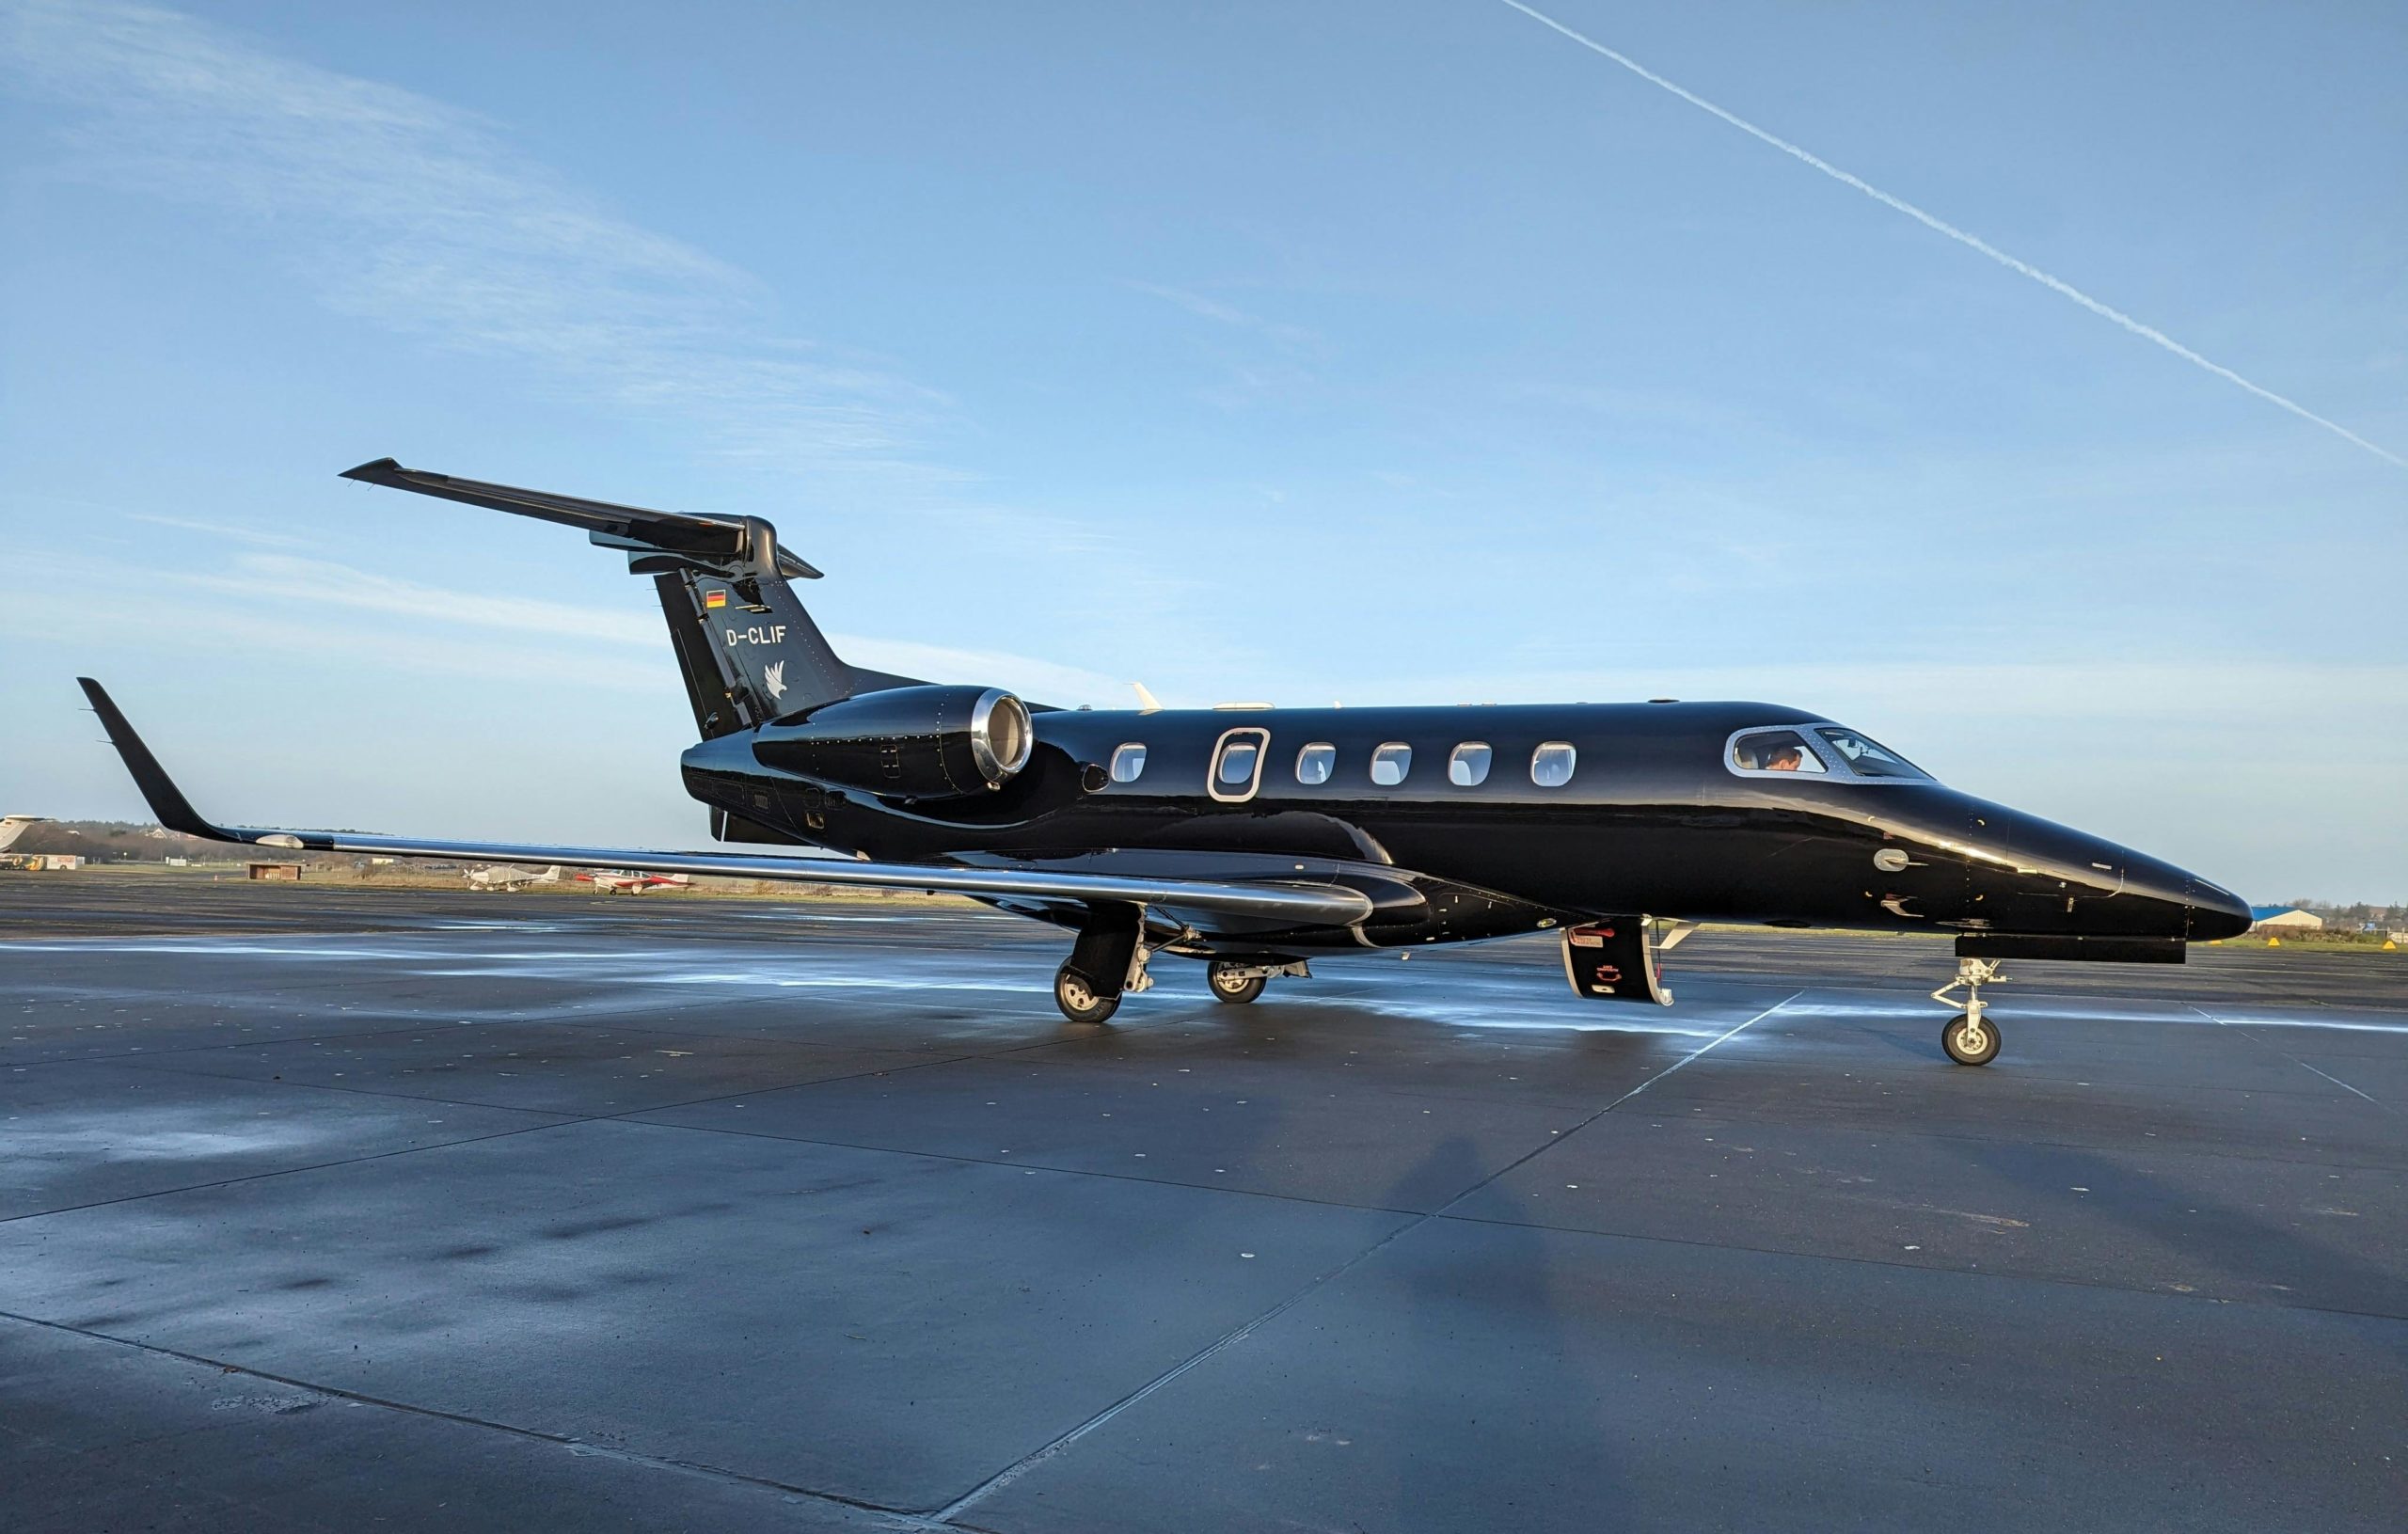 Charter Private Jet